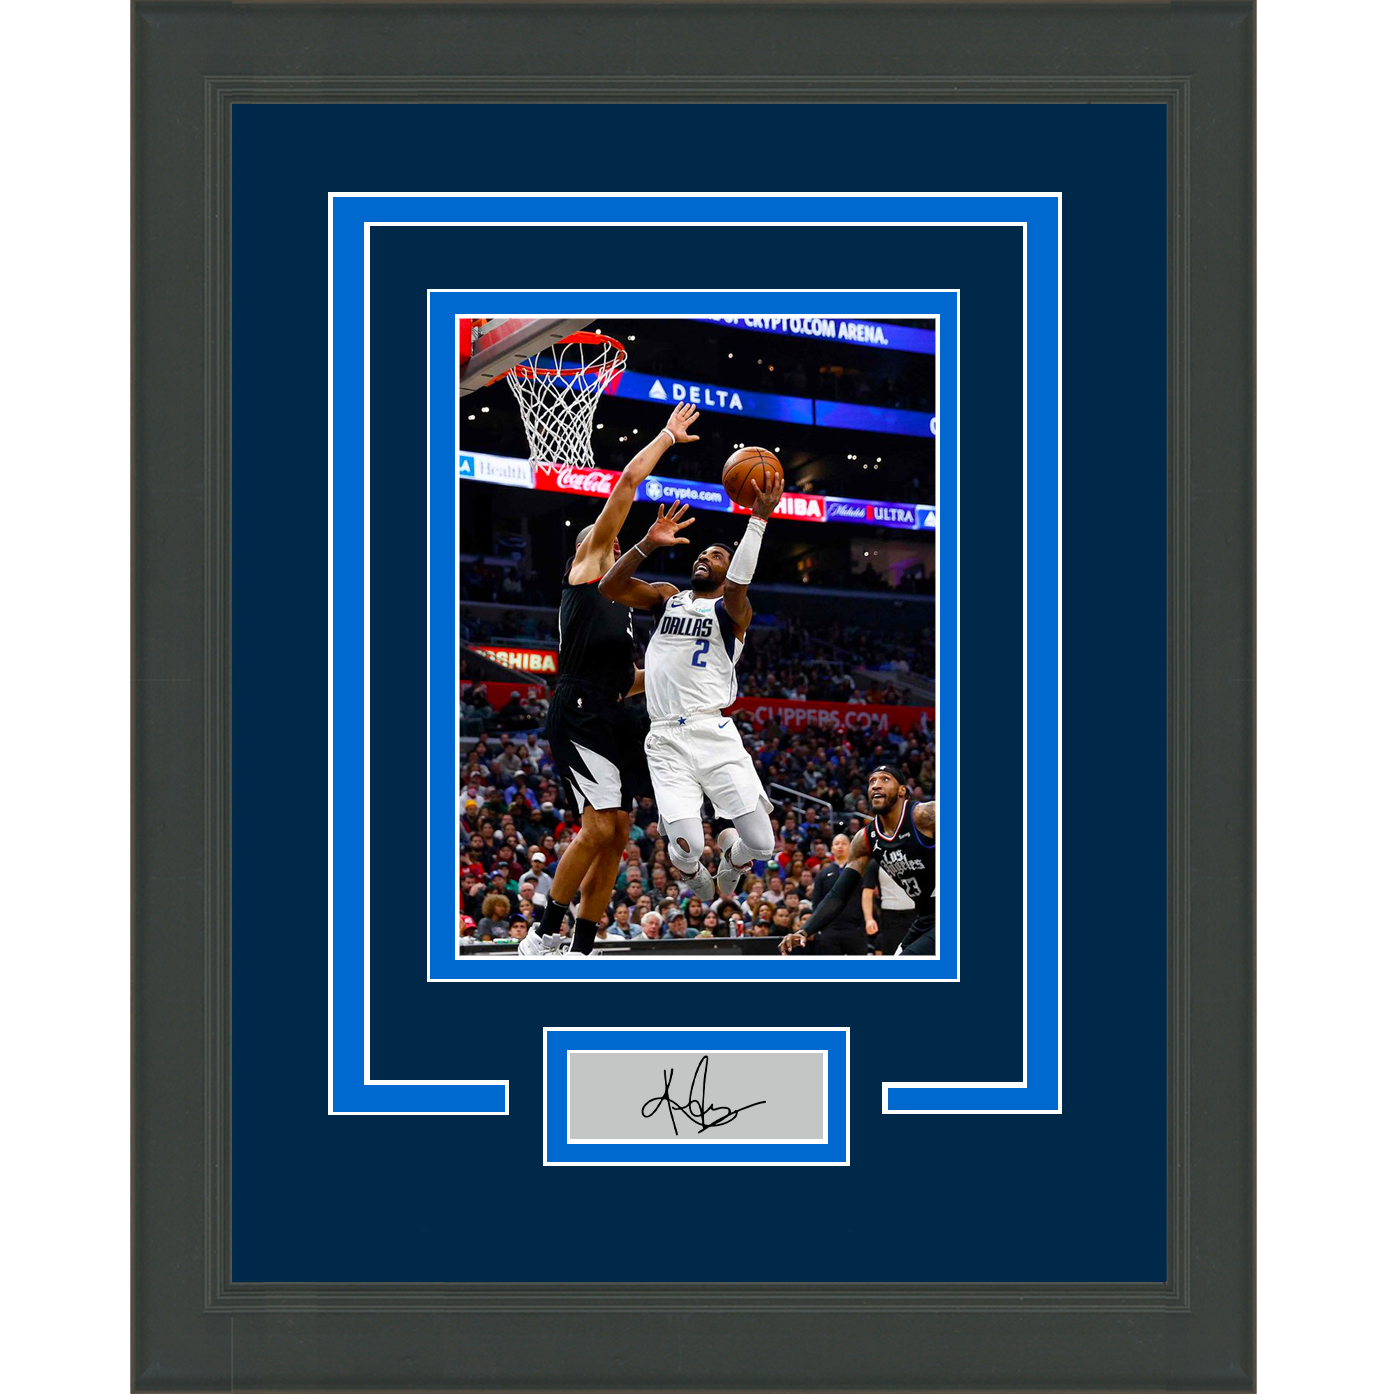 Framed Facsimile Autographed Kyrie Irving 33x42 Dallas Blue Reprint Laser  Auto Basketball Jersey - Hall of Fame Sports Memorabilia